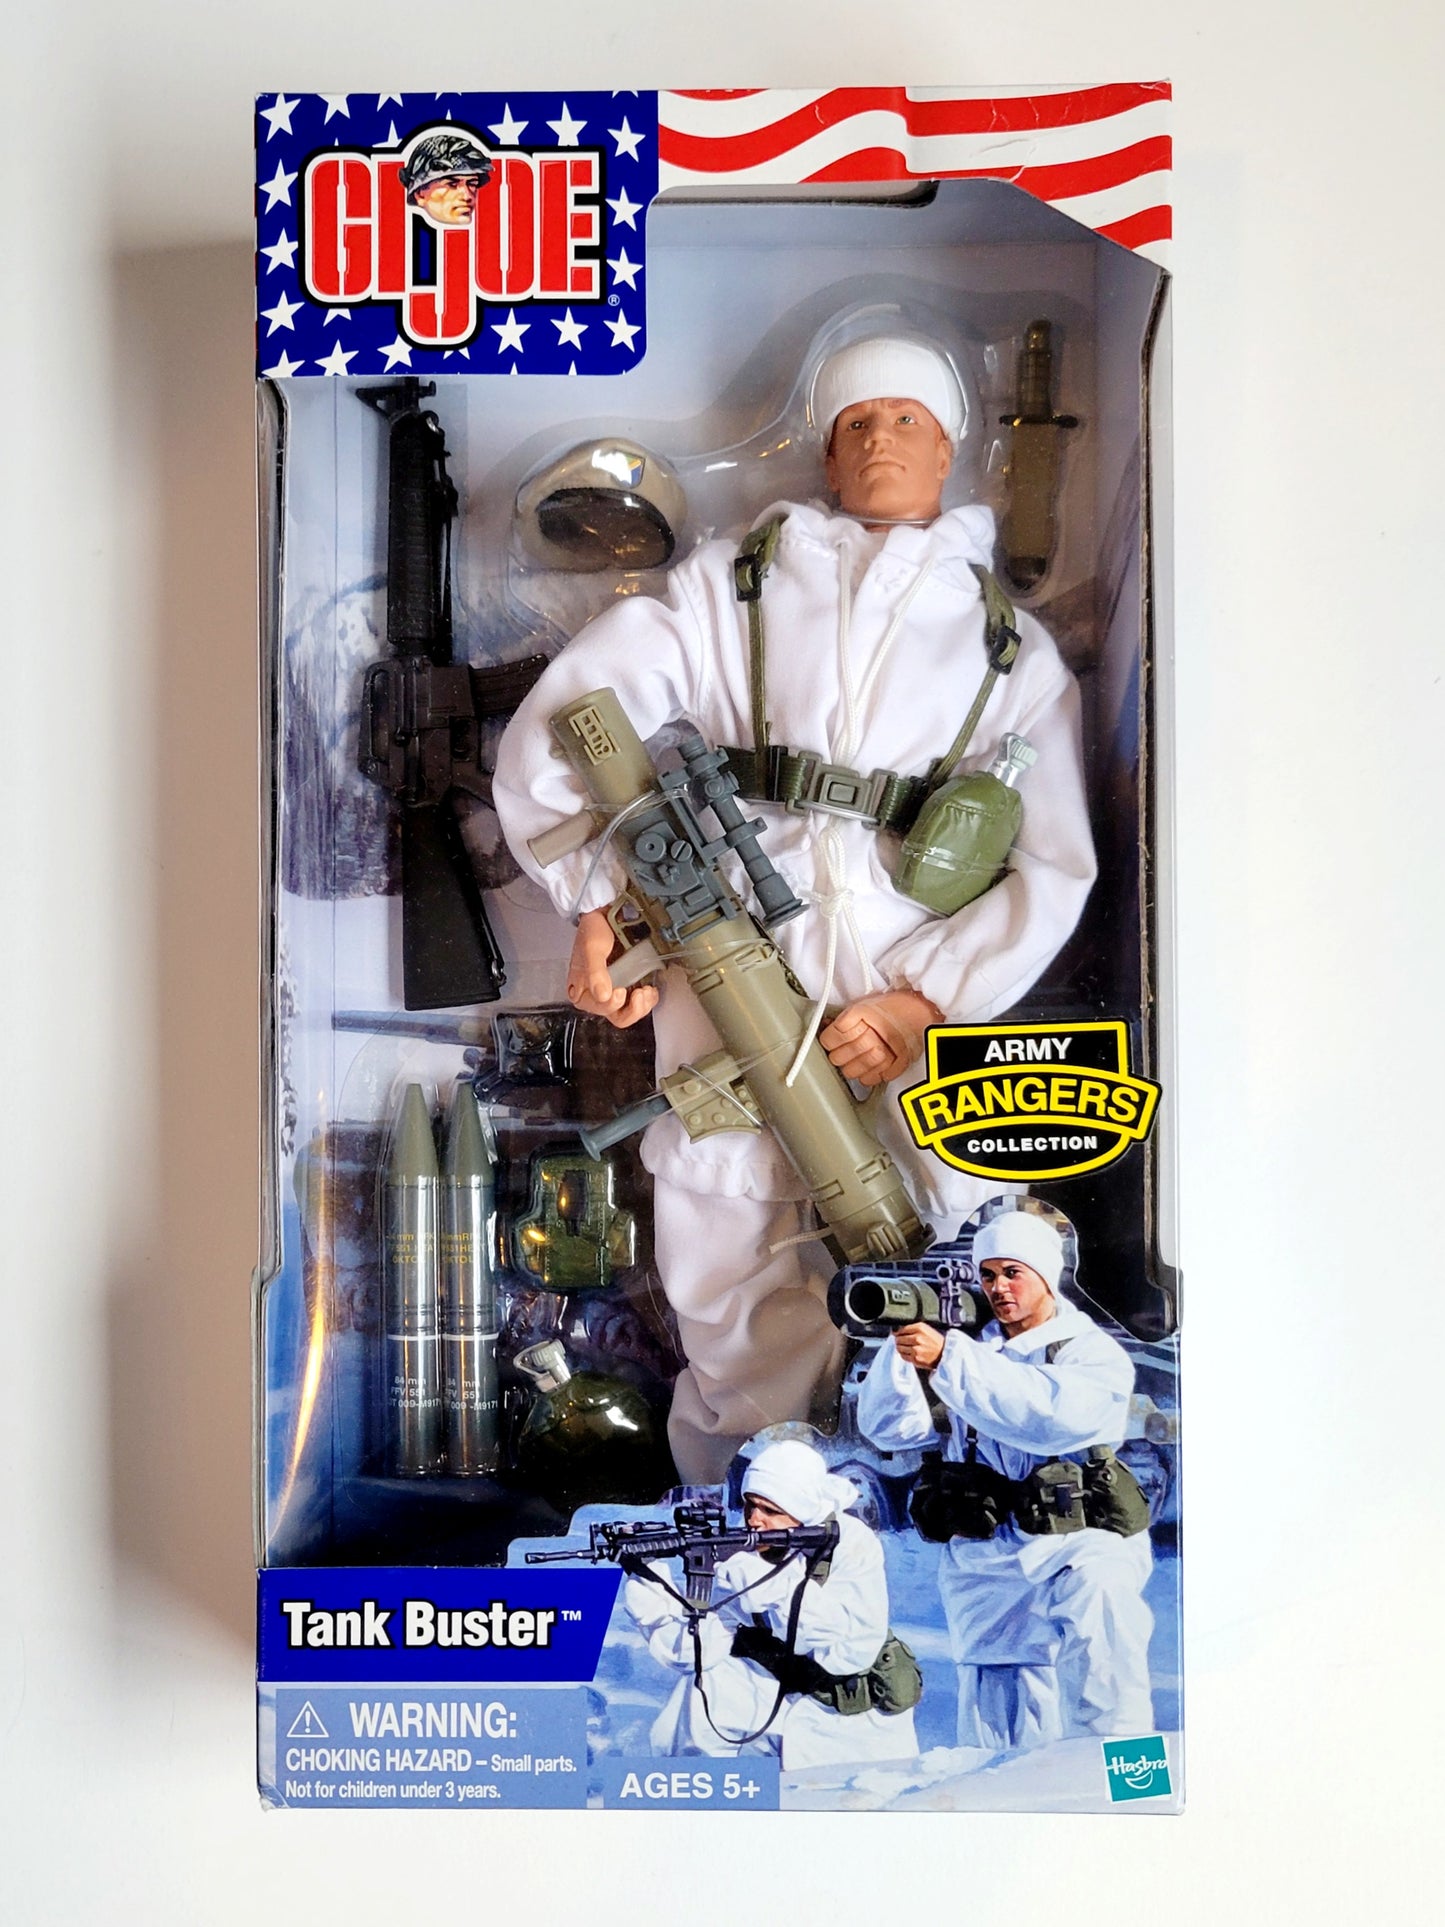 G.I. Joe Army Rangers Collection Tank Buster 12-Inch Action Figure